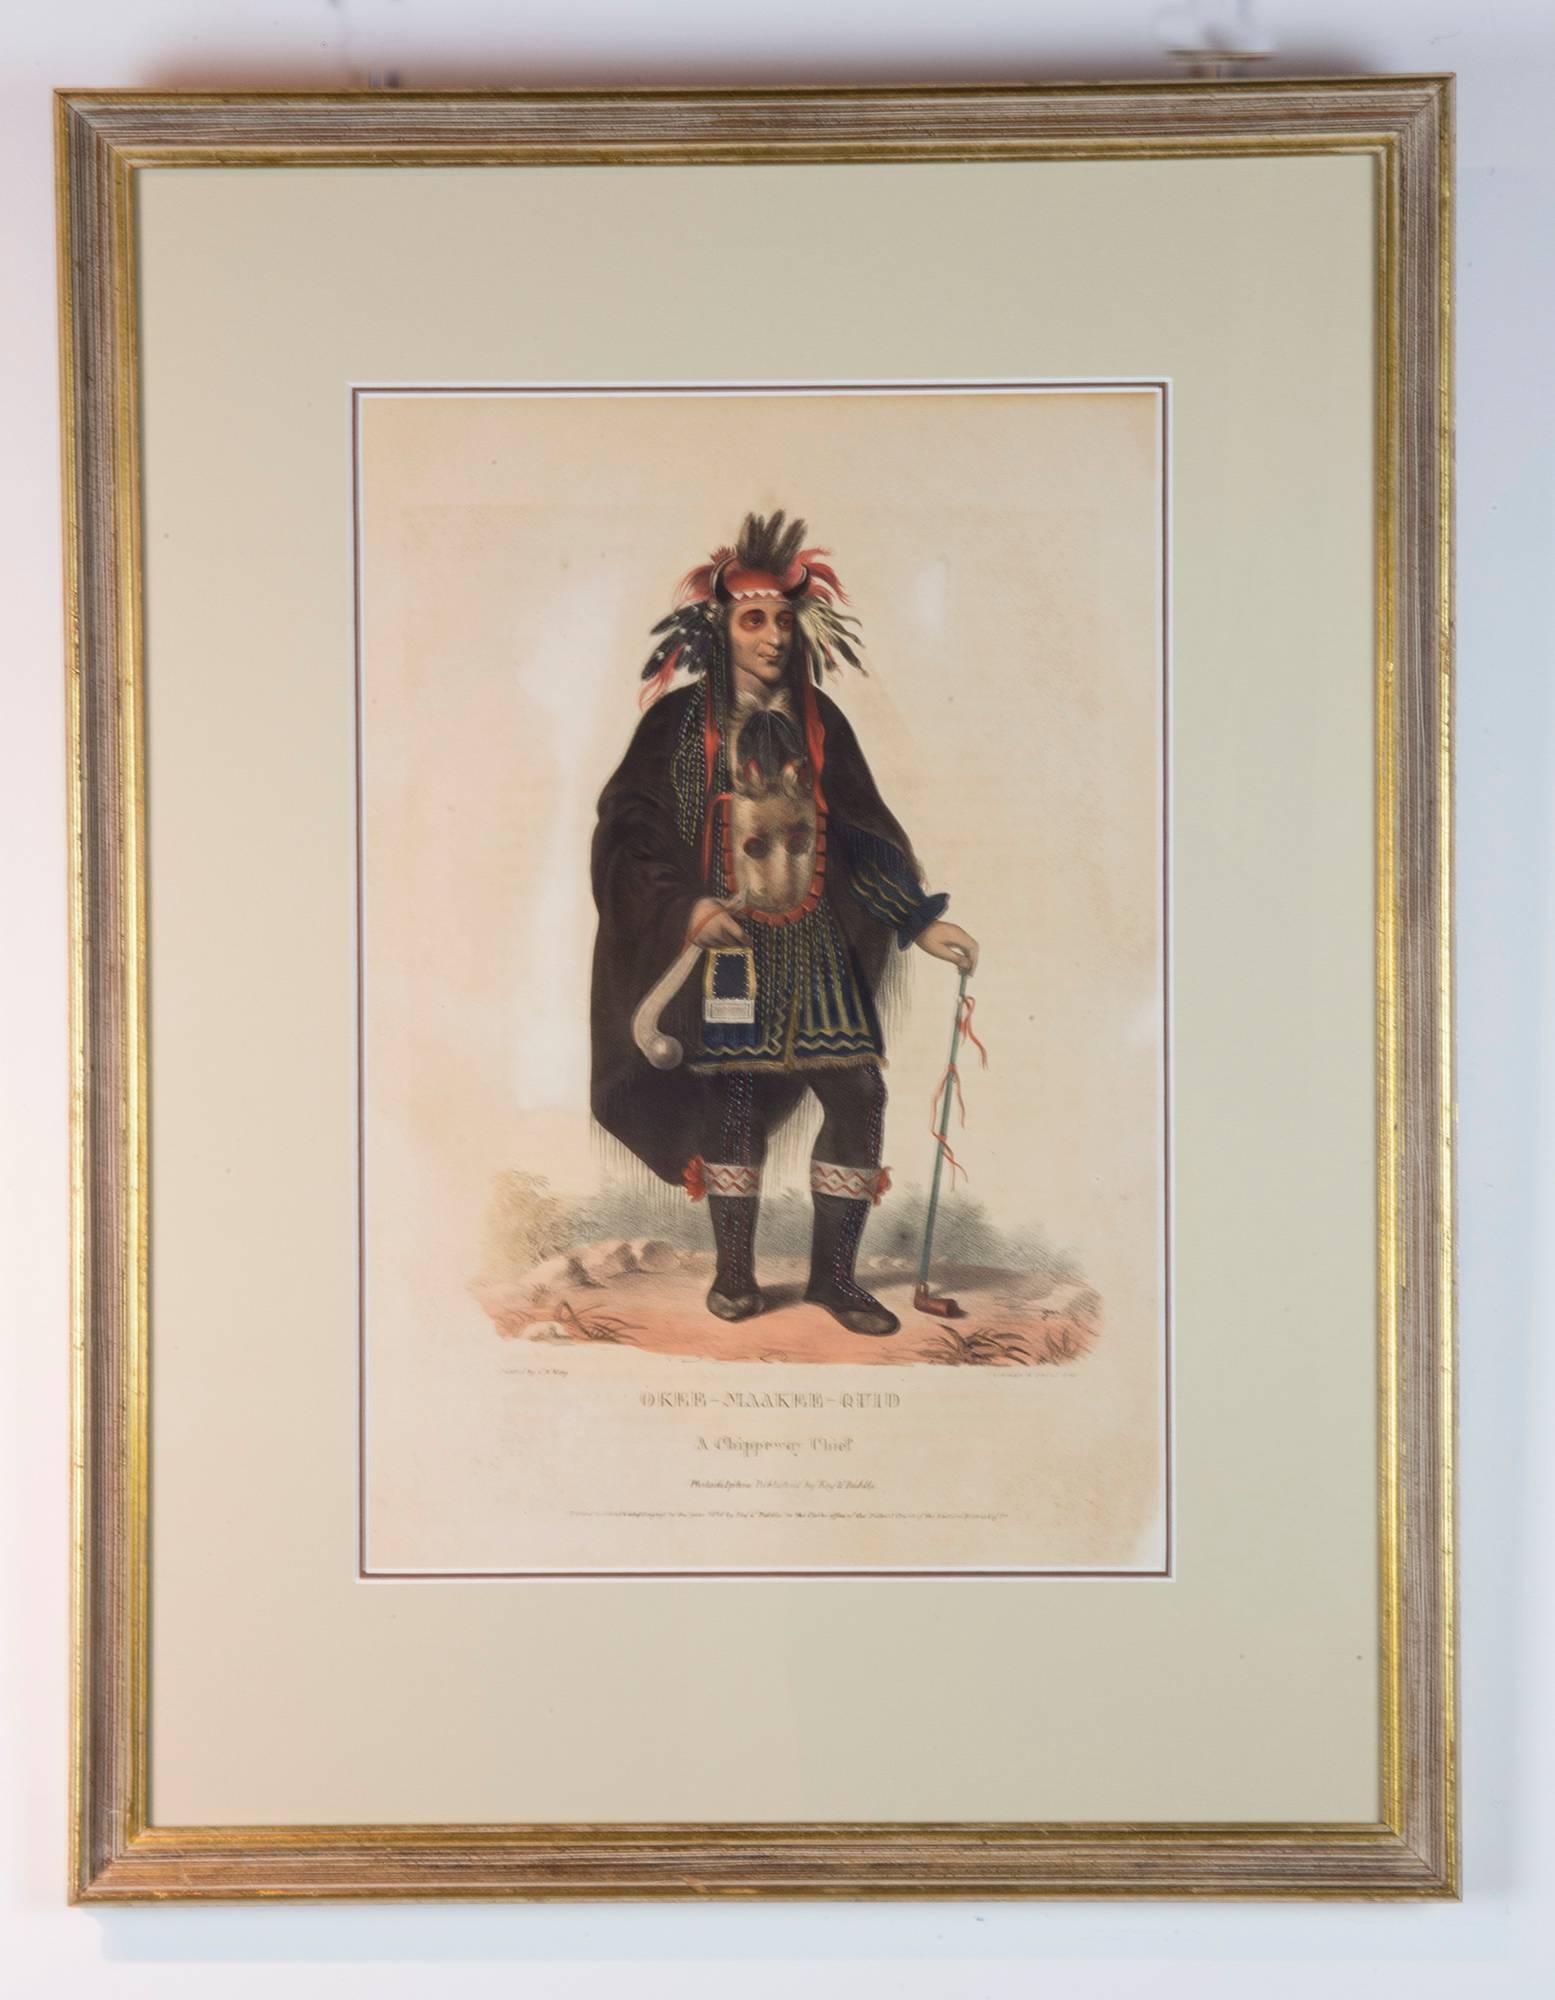 Pair of folio size original hand colored lithographs of American Indians, created by Thomas McKenney and James Hall based on oil paintings by Charles Bird King(1785-1862) for their three volume set ''History of the Indian Tribes of North America''